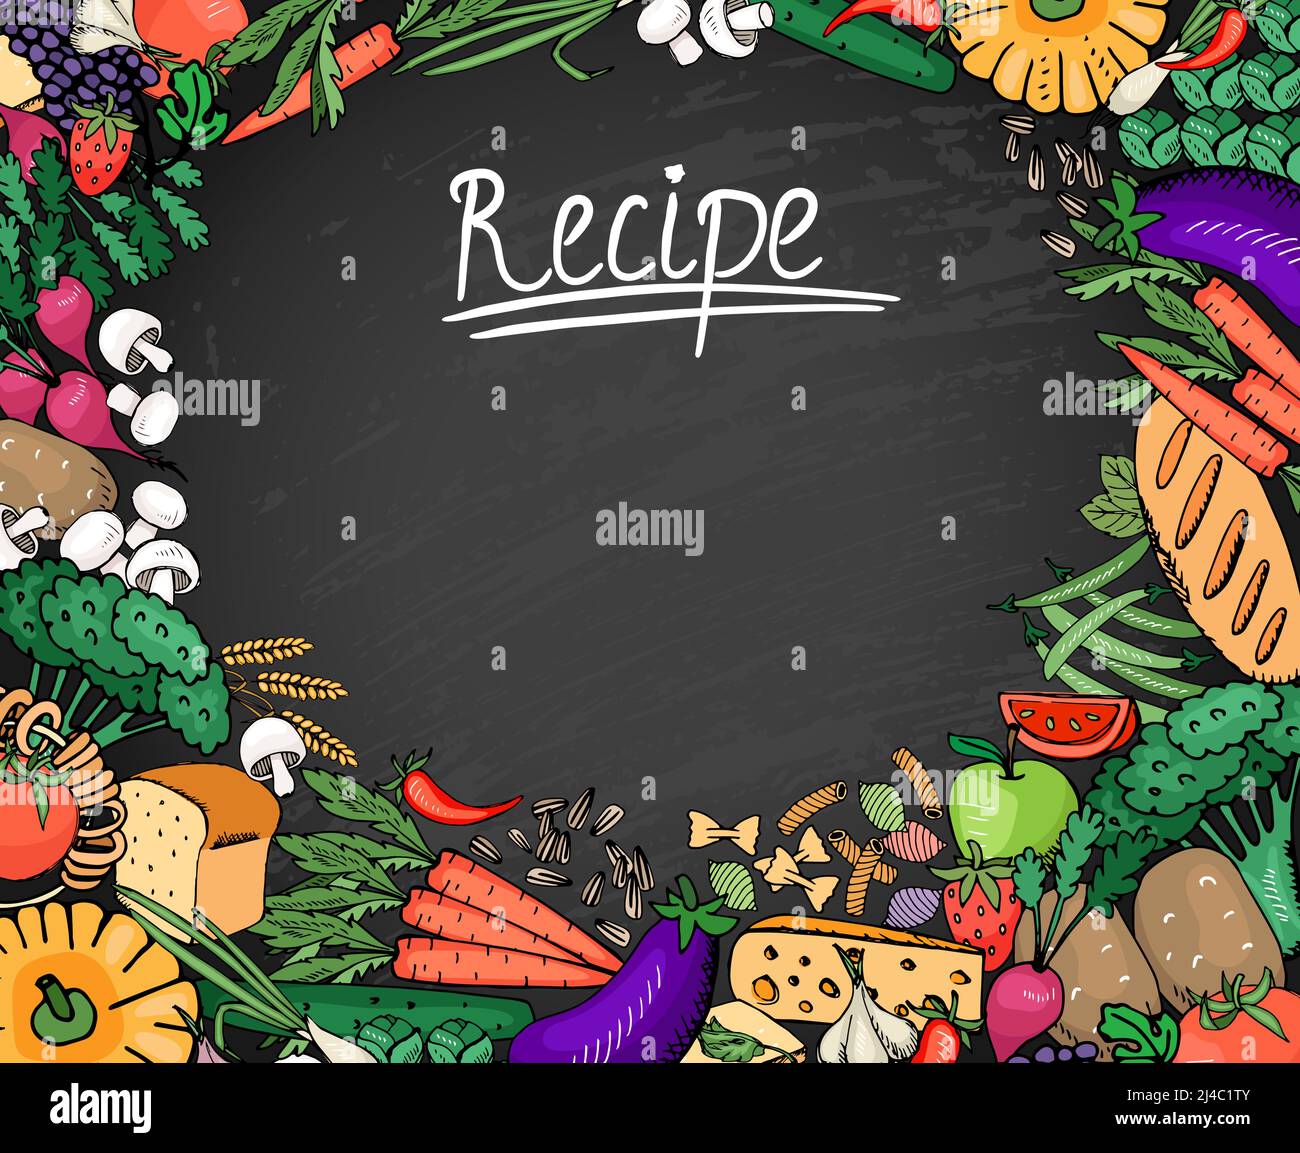 Colored Food Recipe Ingredients Such as Vegetables  Bread and Spices Background on Black Chalkboard Stock Vector